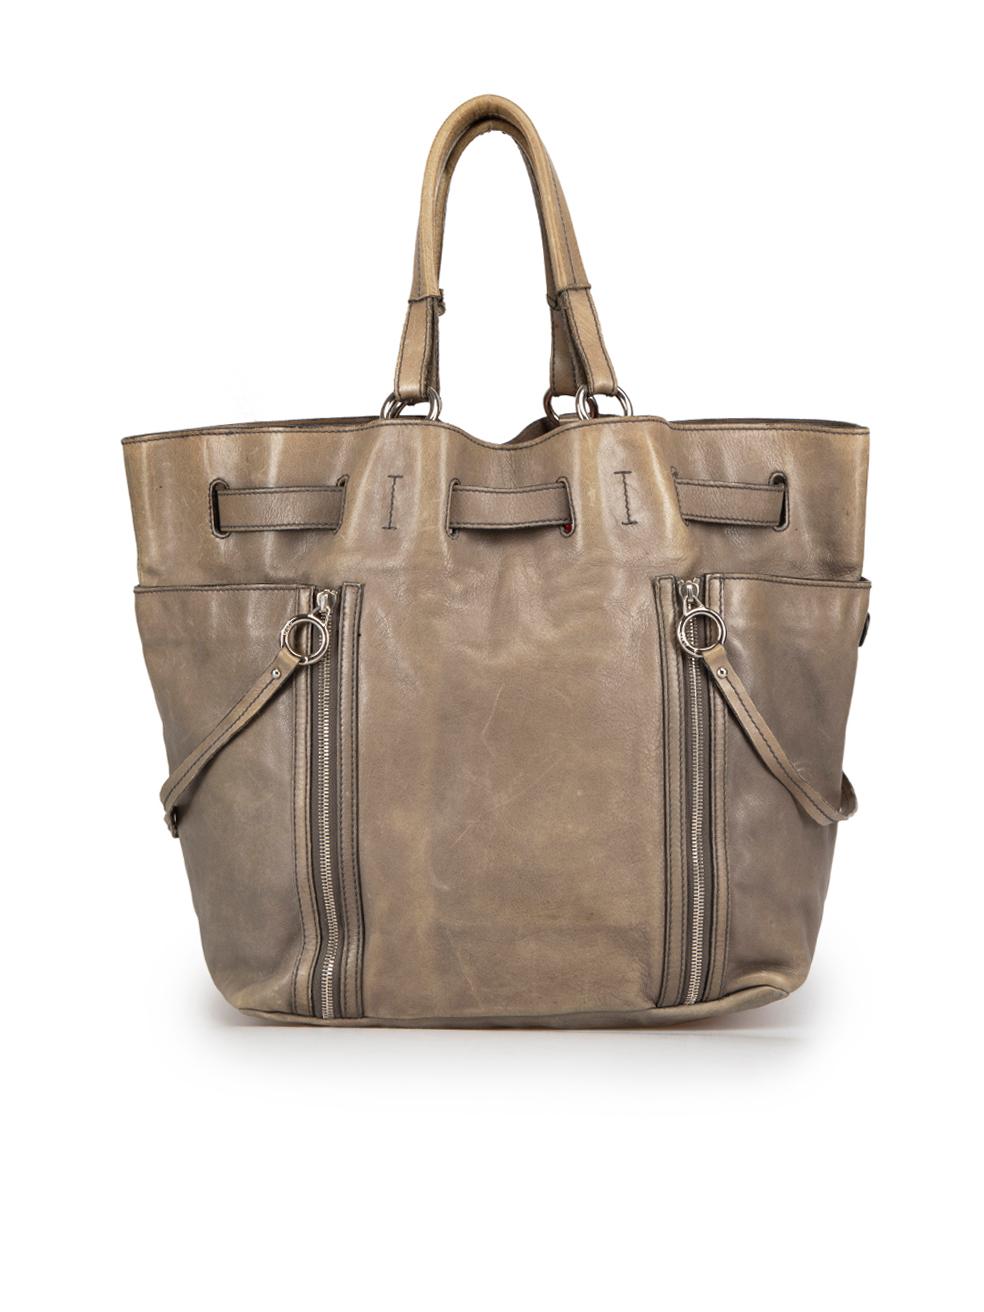 Dolce & Gabbana Khaki Leather Strap Tote Bag In Good Condition In London, GB